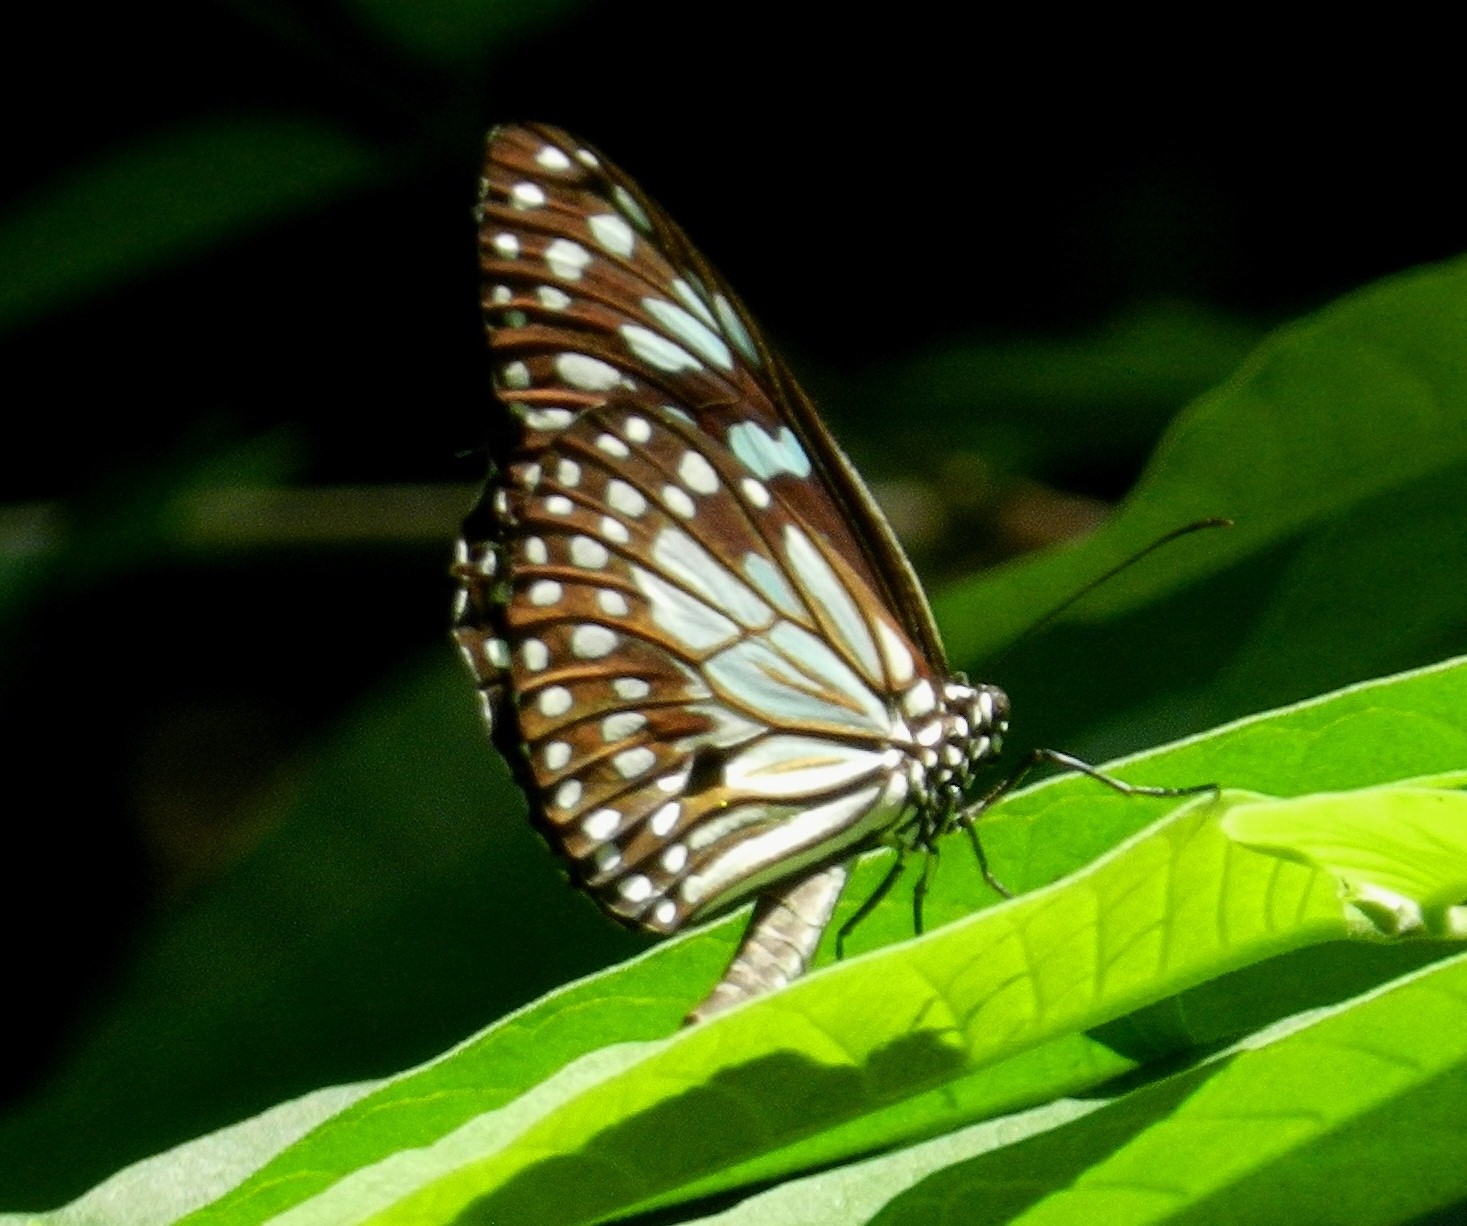 an image of a erfly that is perched on a plant